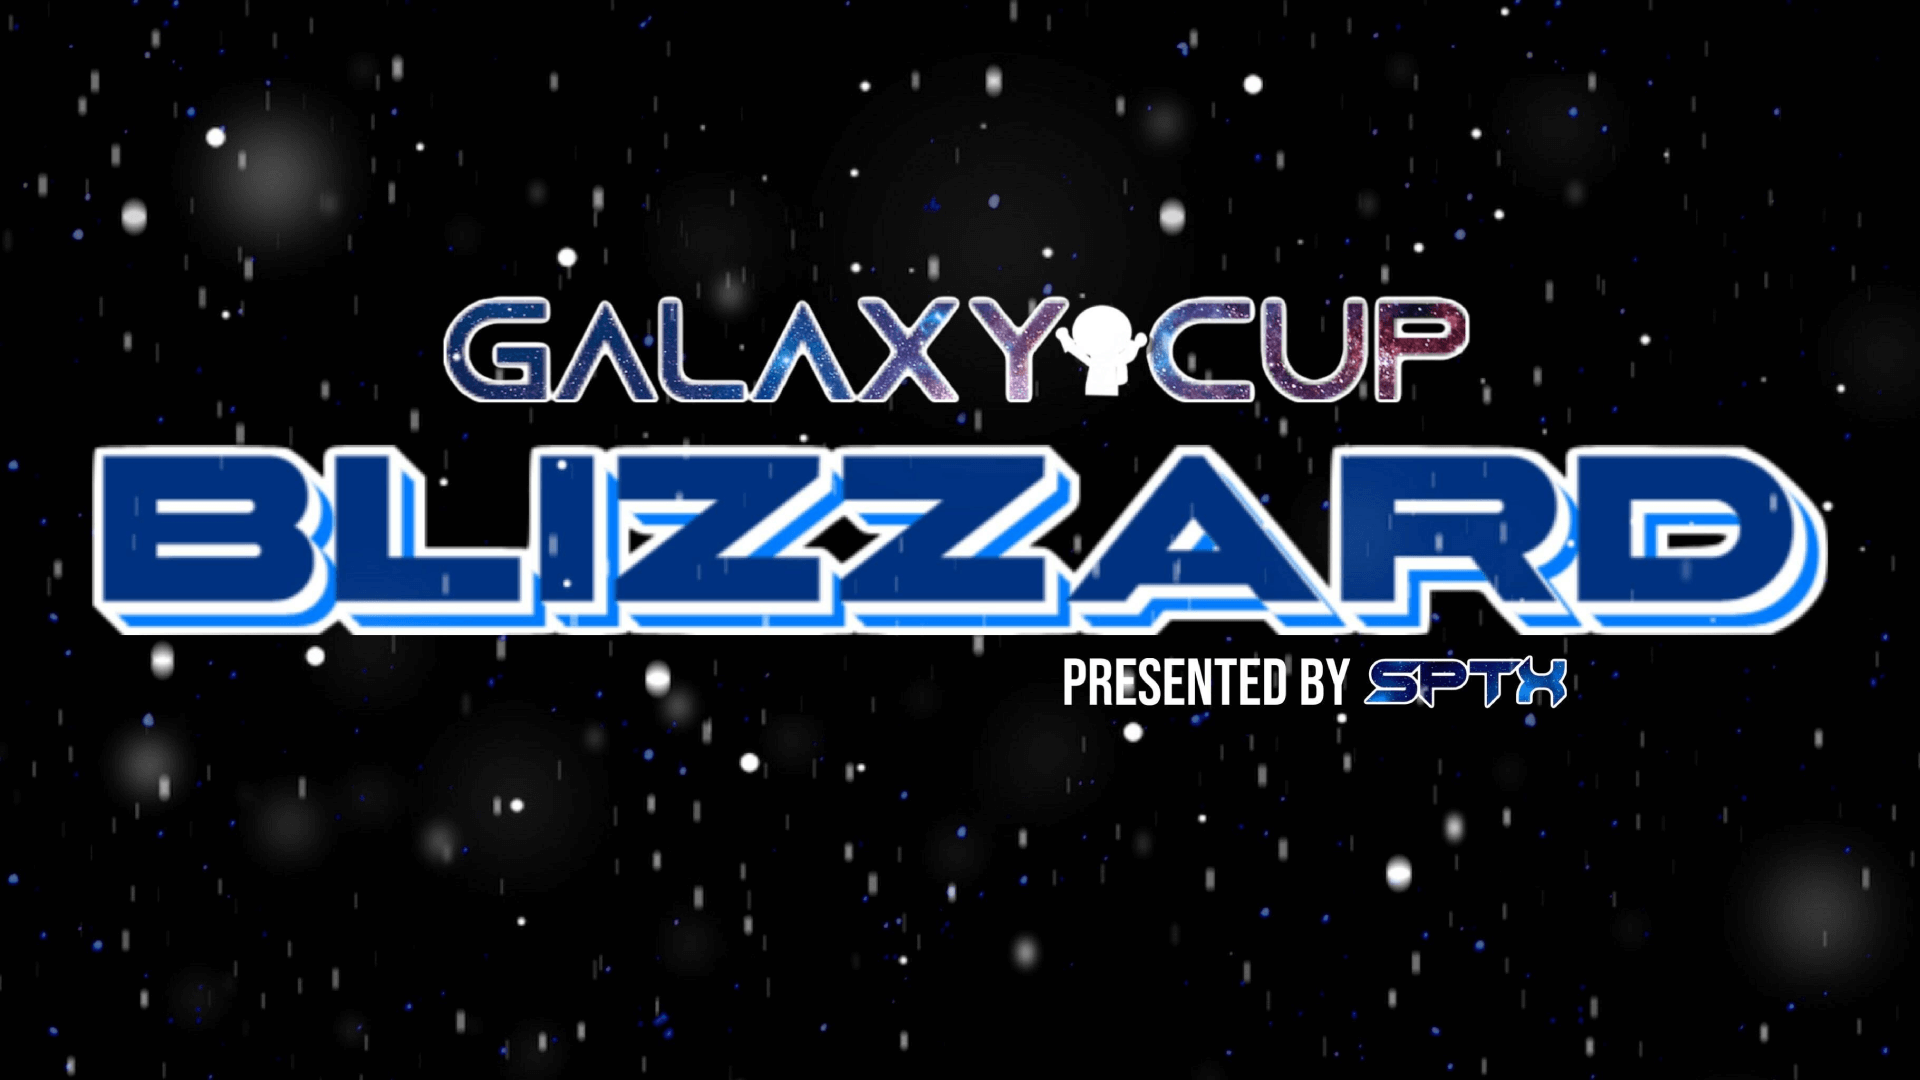 Four tournaments of Brawlhalla Galaxy Cup: Blizzard